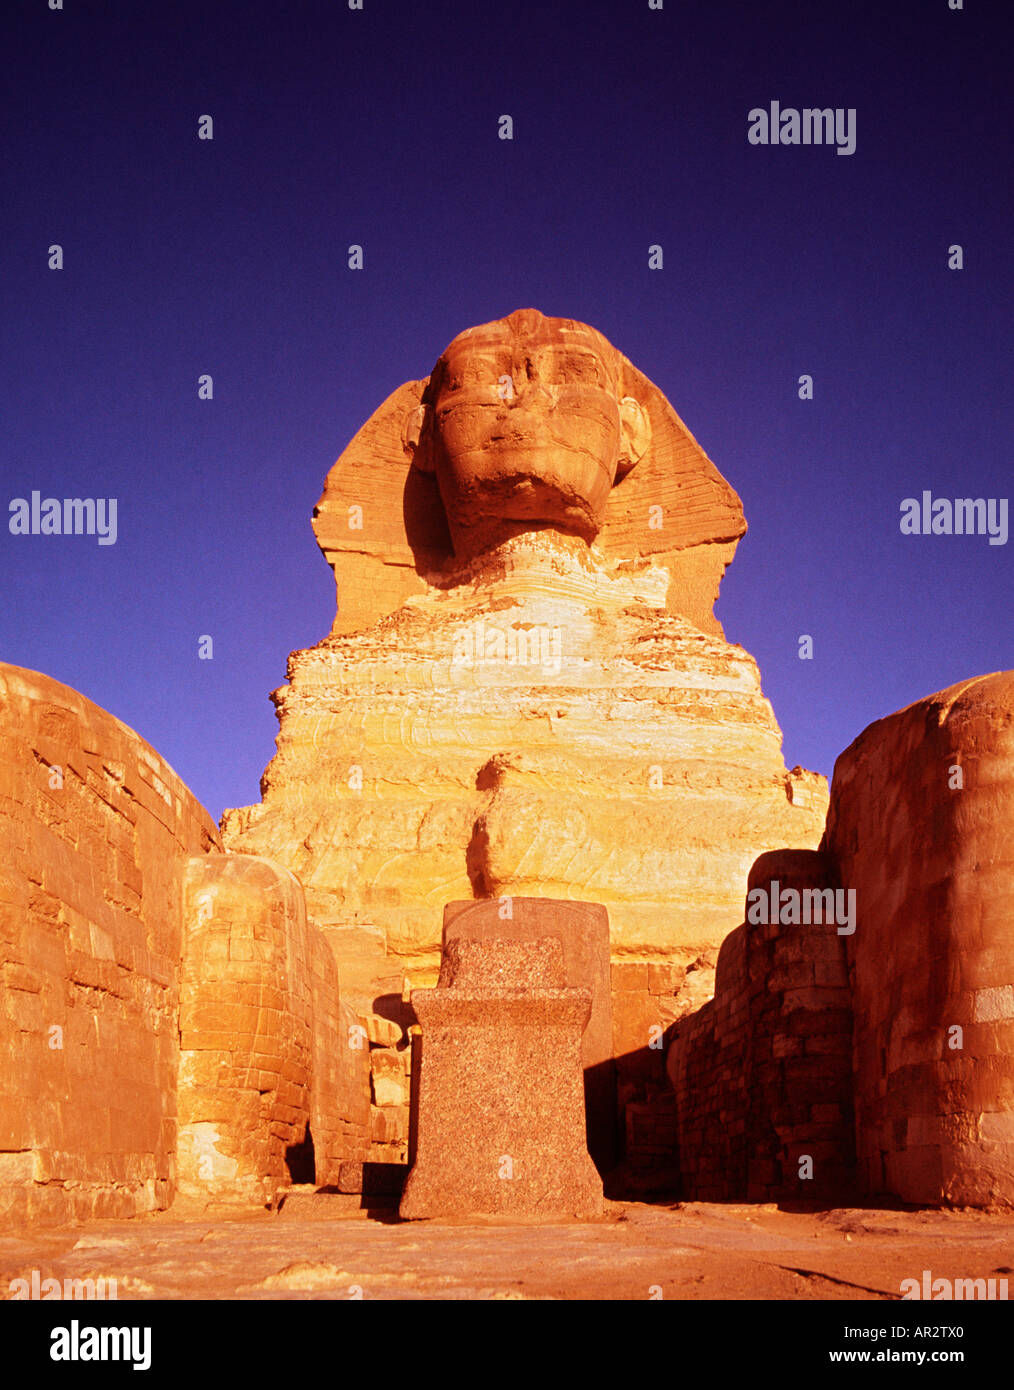 The Sphinx, Egypt, at sunrise Giza, Cairo, Egypt. Close up birds eye view, of the dream stele and the Sphinx from between the paws Stock Photo